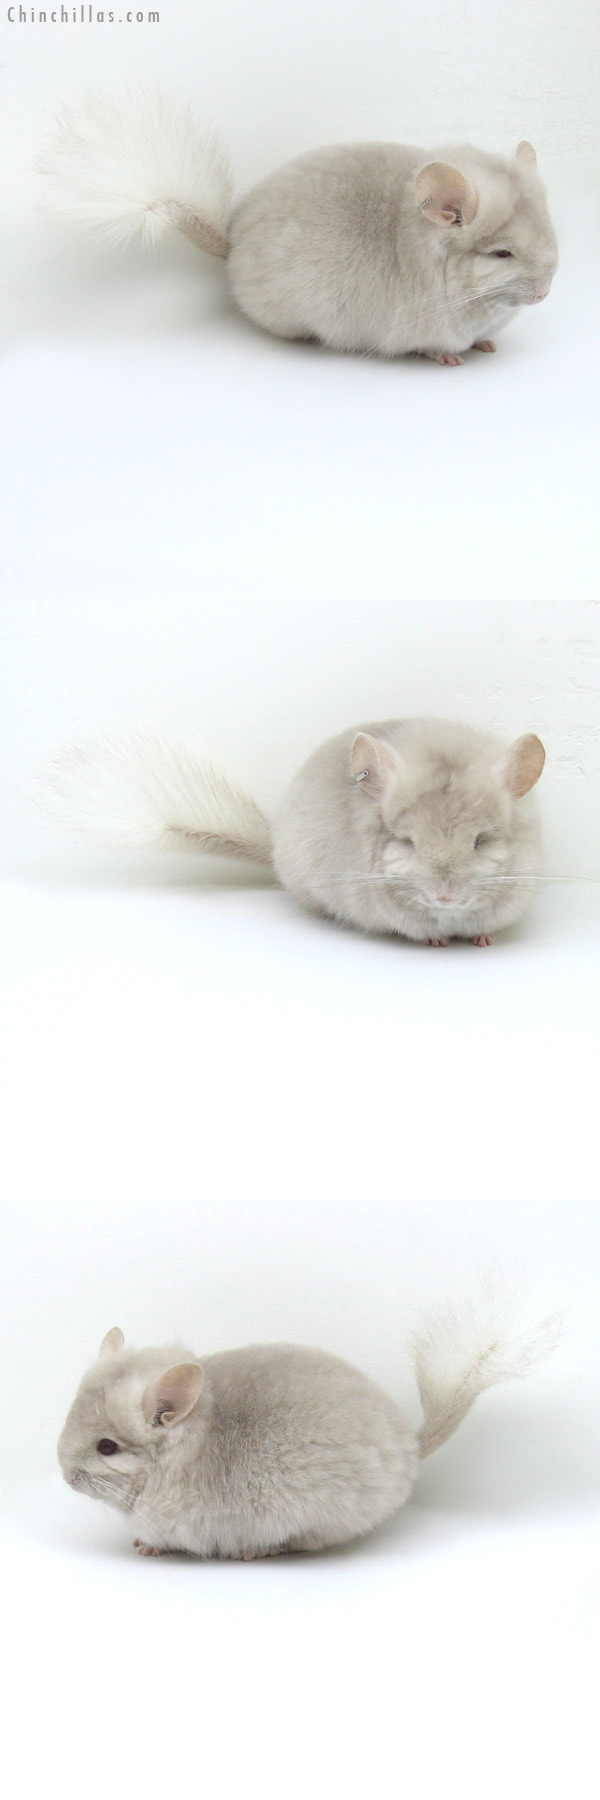 Chinchilla or related item offered for sale or export on Chinchillas.com - 12039 Exceptional Homo Beige Royal Persian Angora Female Chinchilla